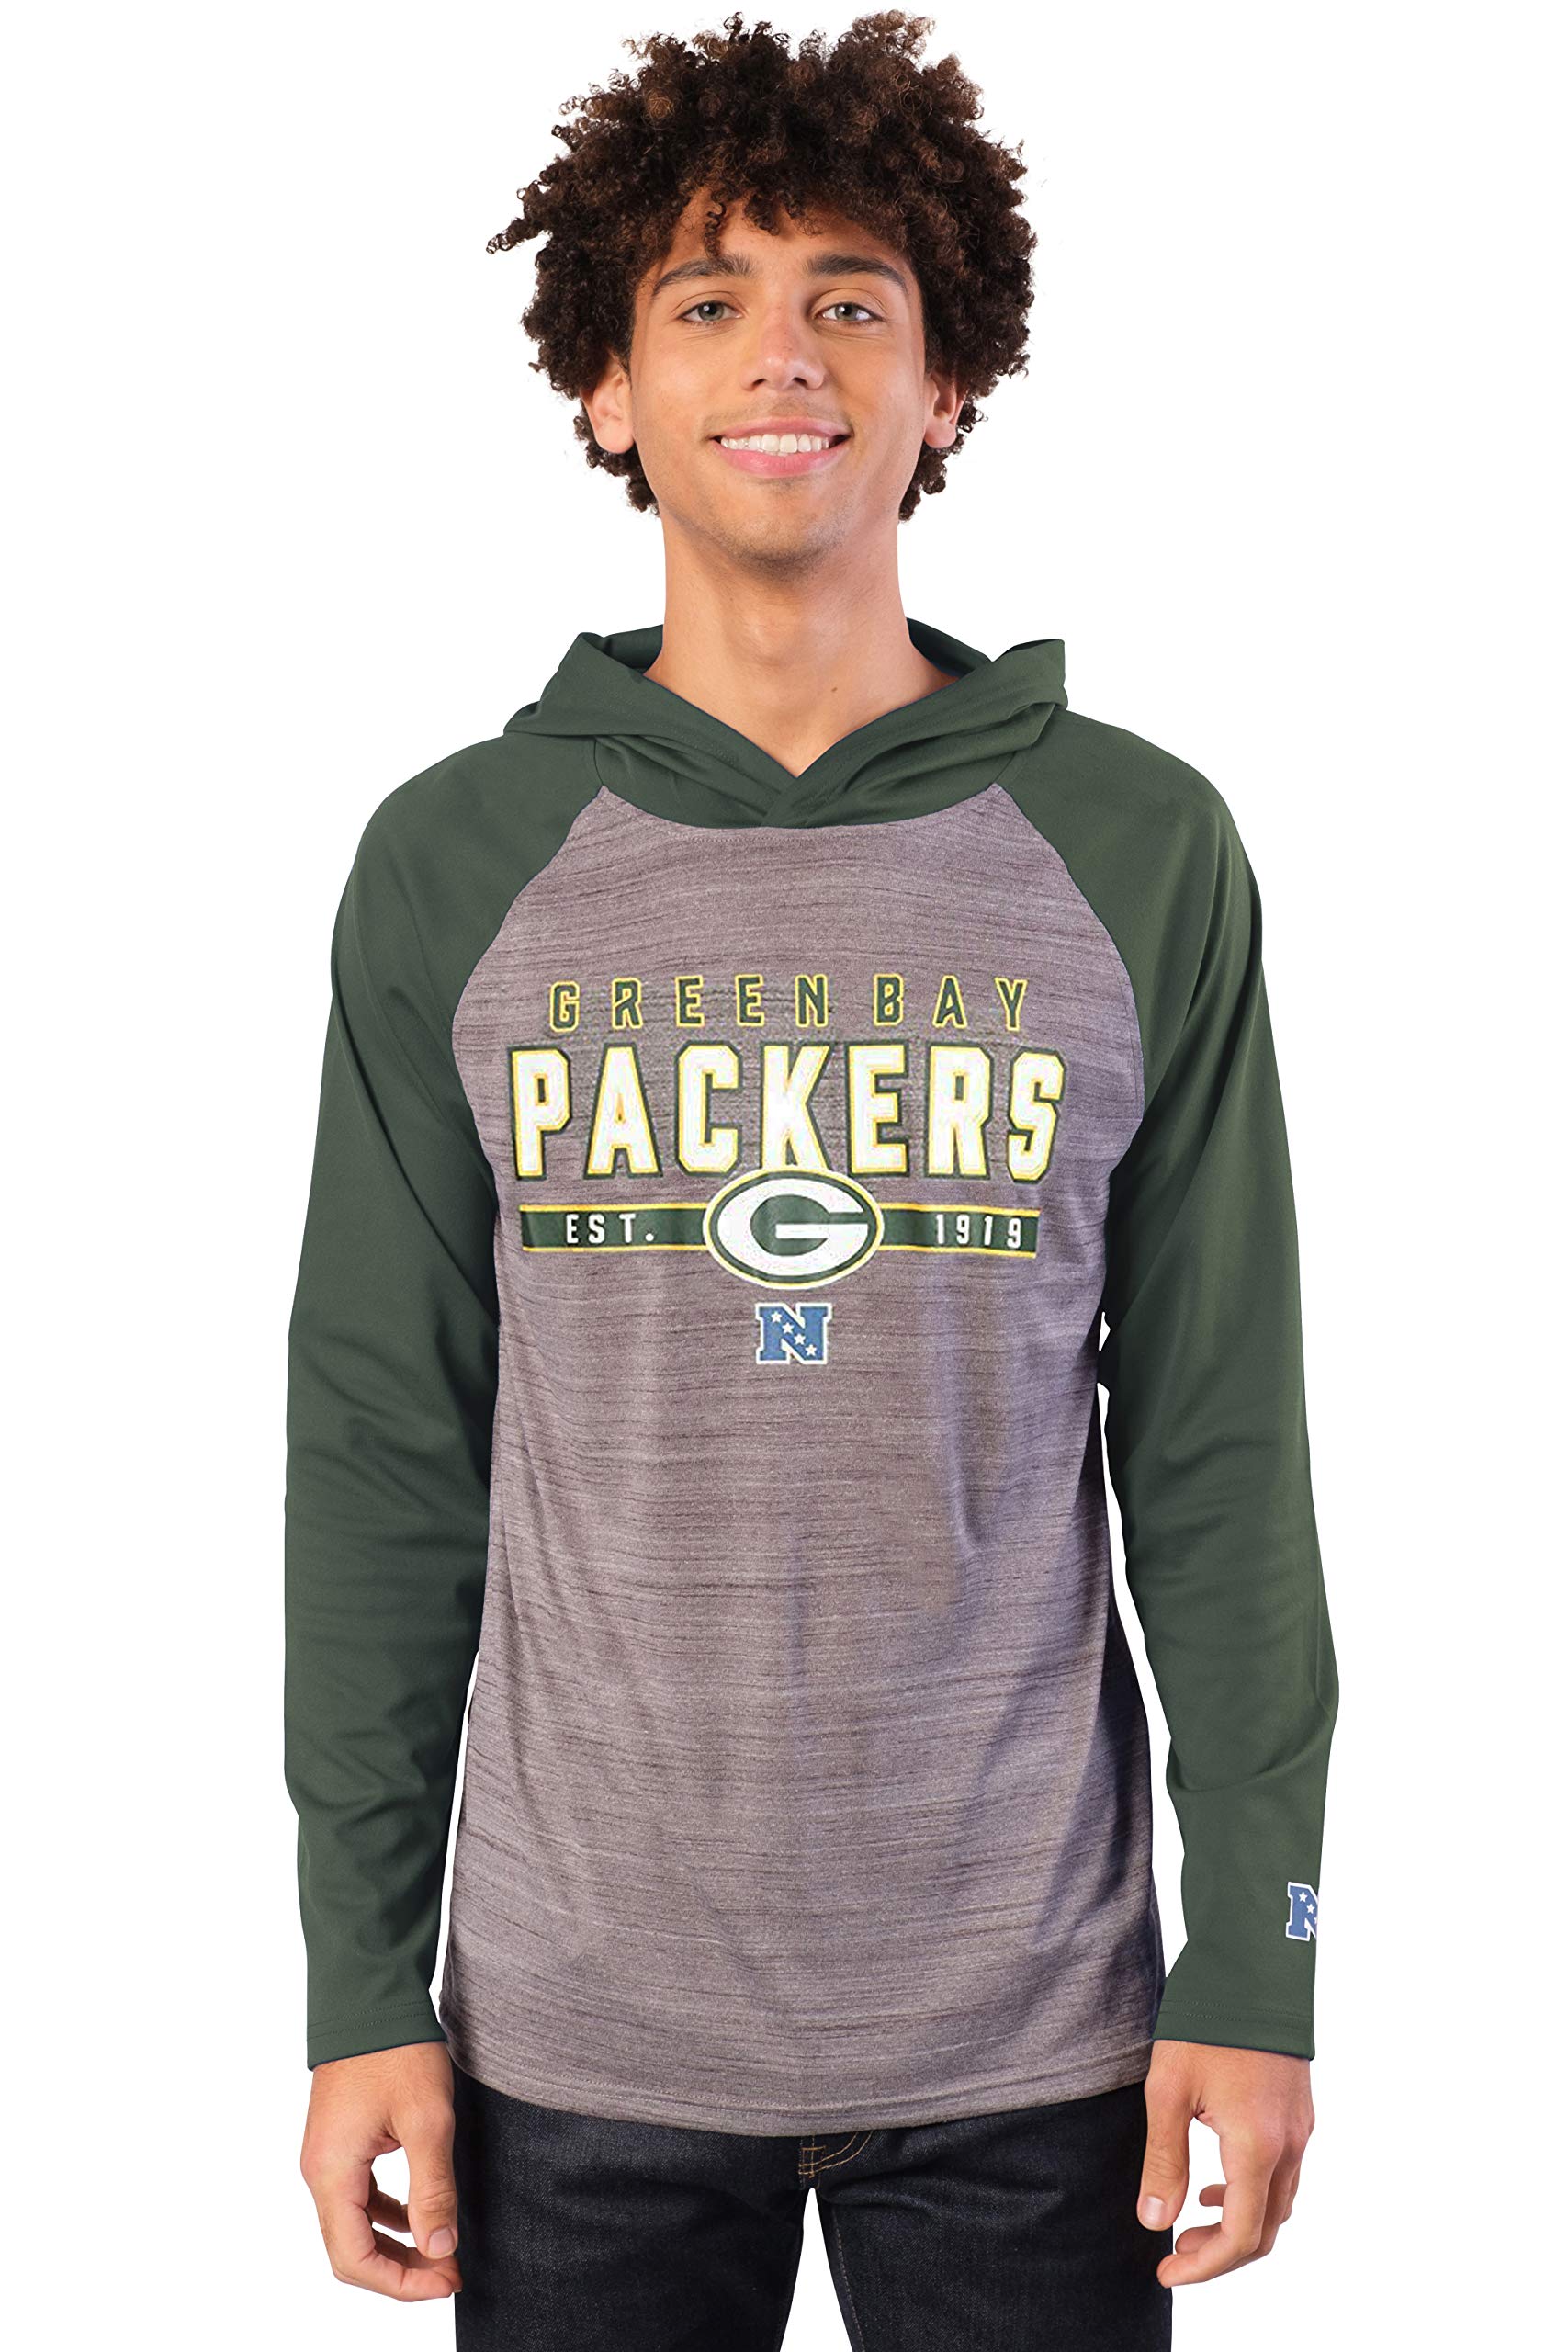 Ultra Game NFL Green Bay Packers Mens Athletic Performance Soft Pullover Lightweight Hoodie Sweatshirt|Green Bay Packers